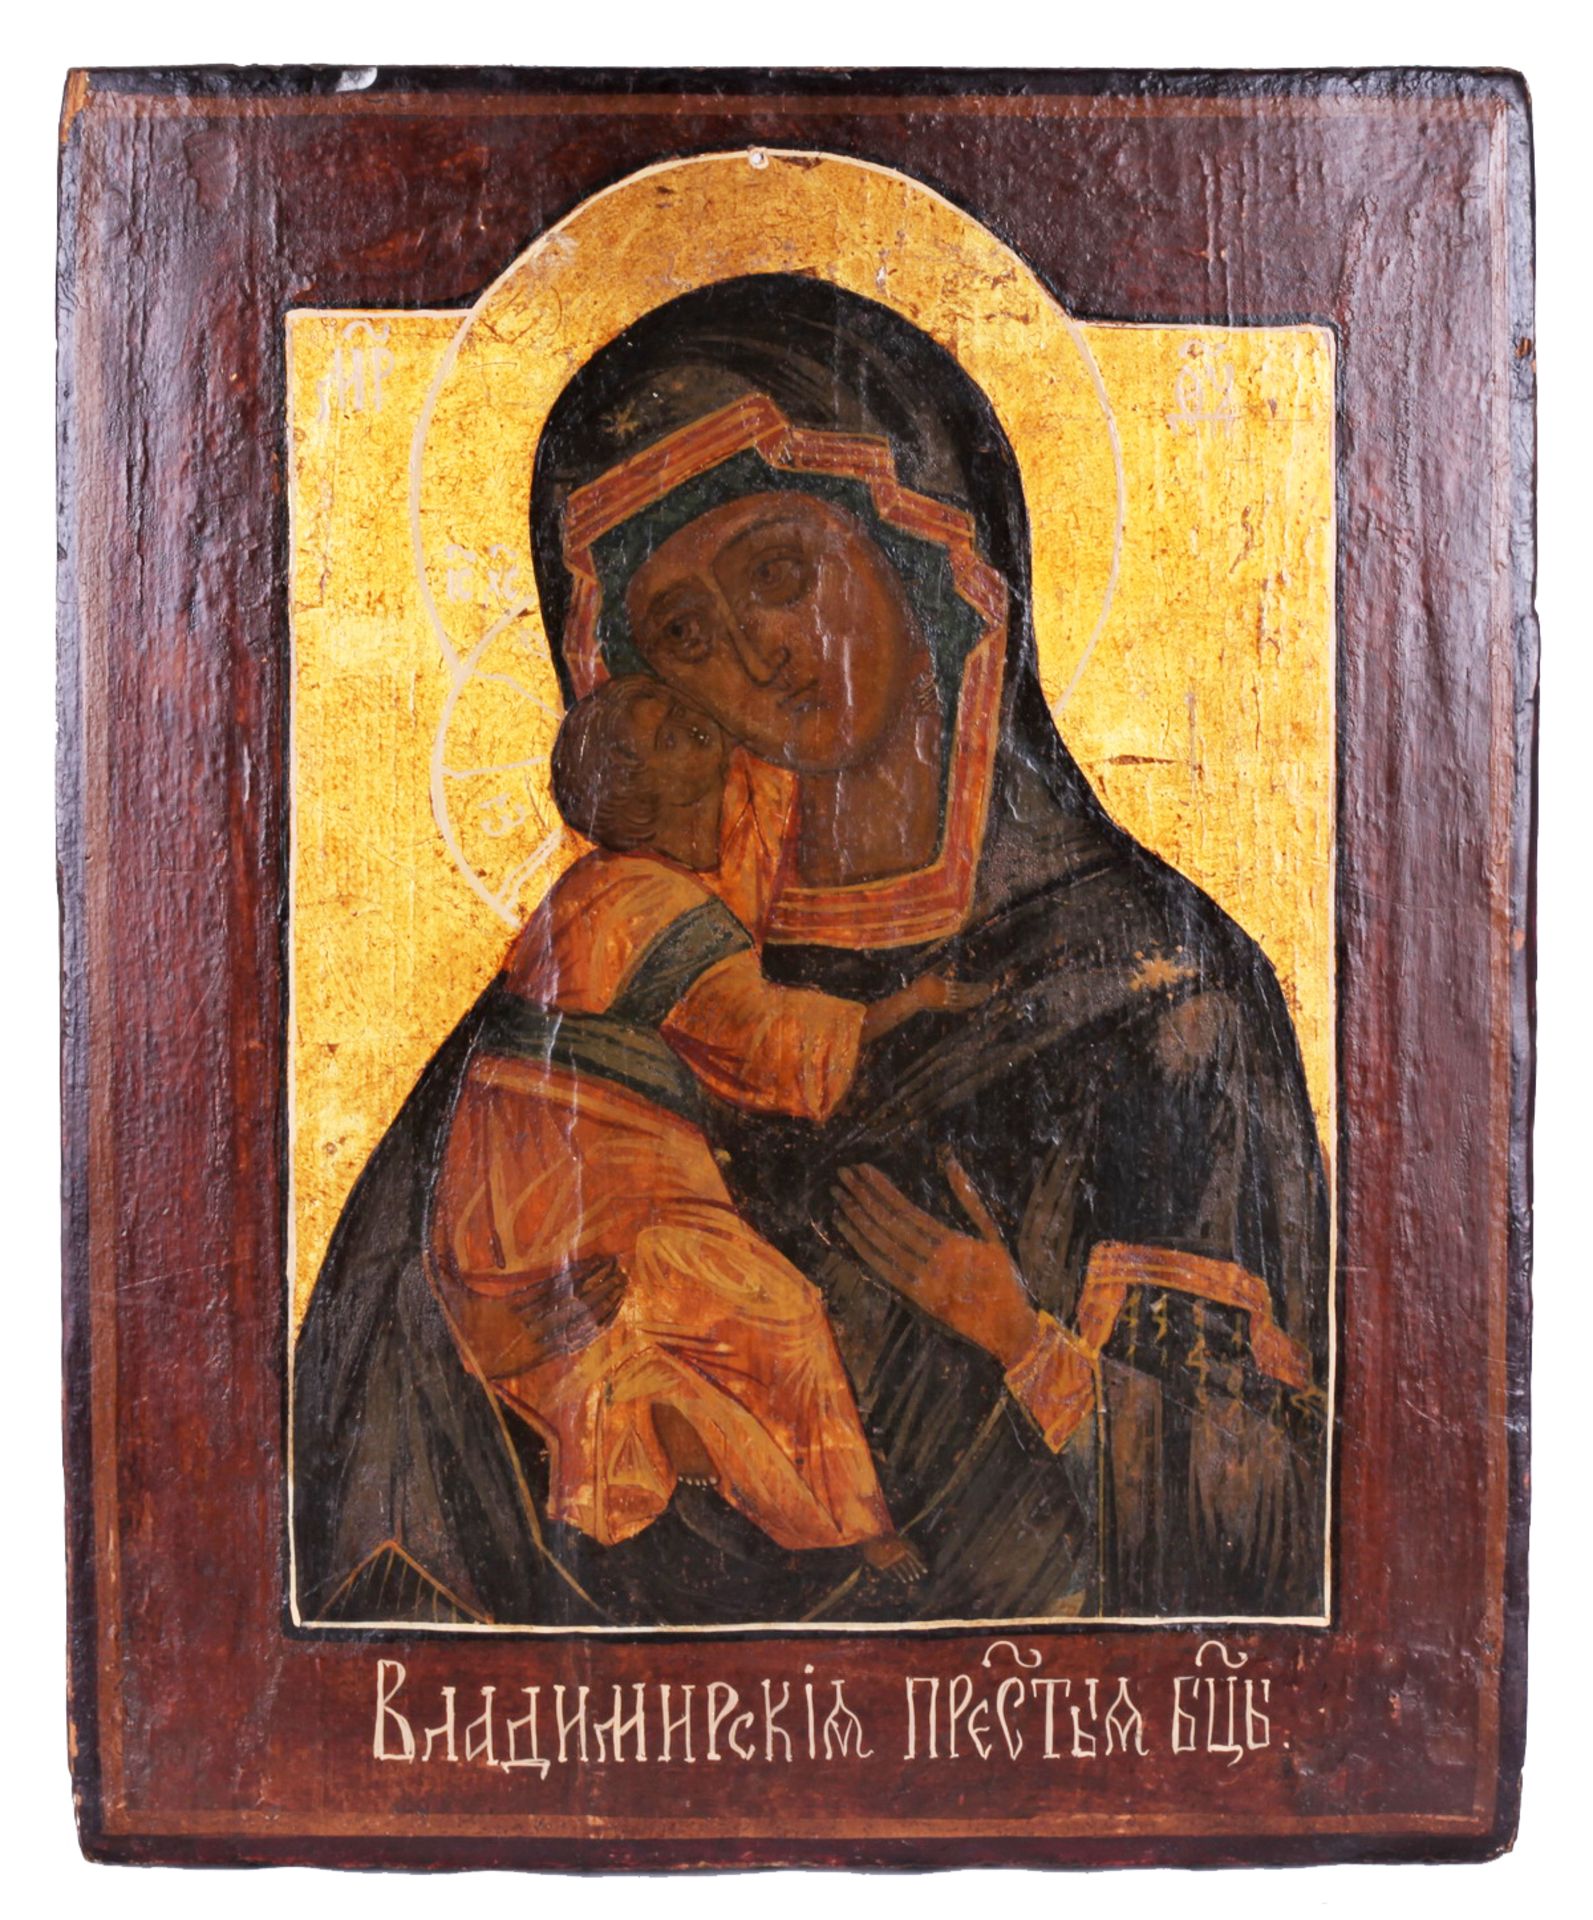 Russian icon "Our lady of Vladimir".